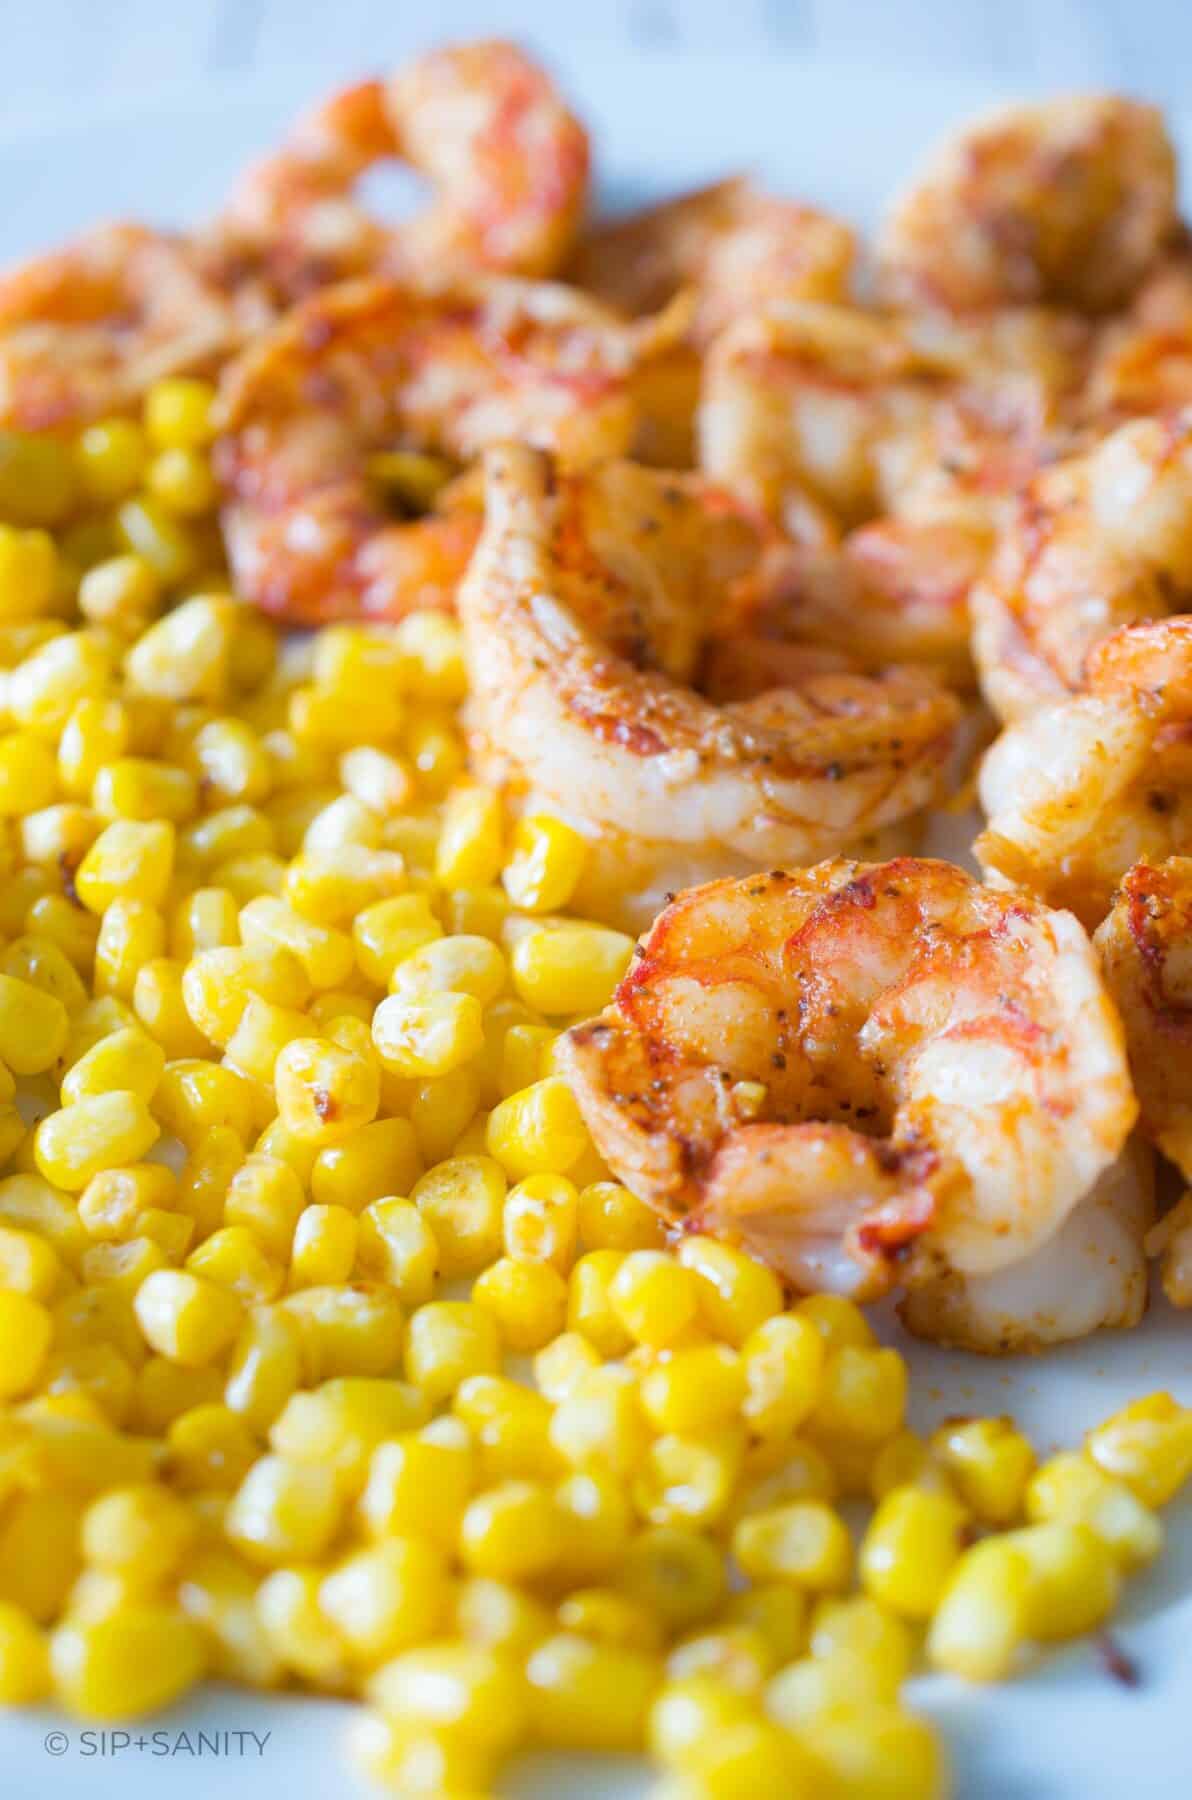 Sauteed shrimp and corn kernels cooling on a plate.